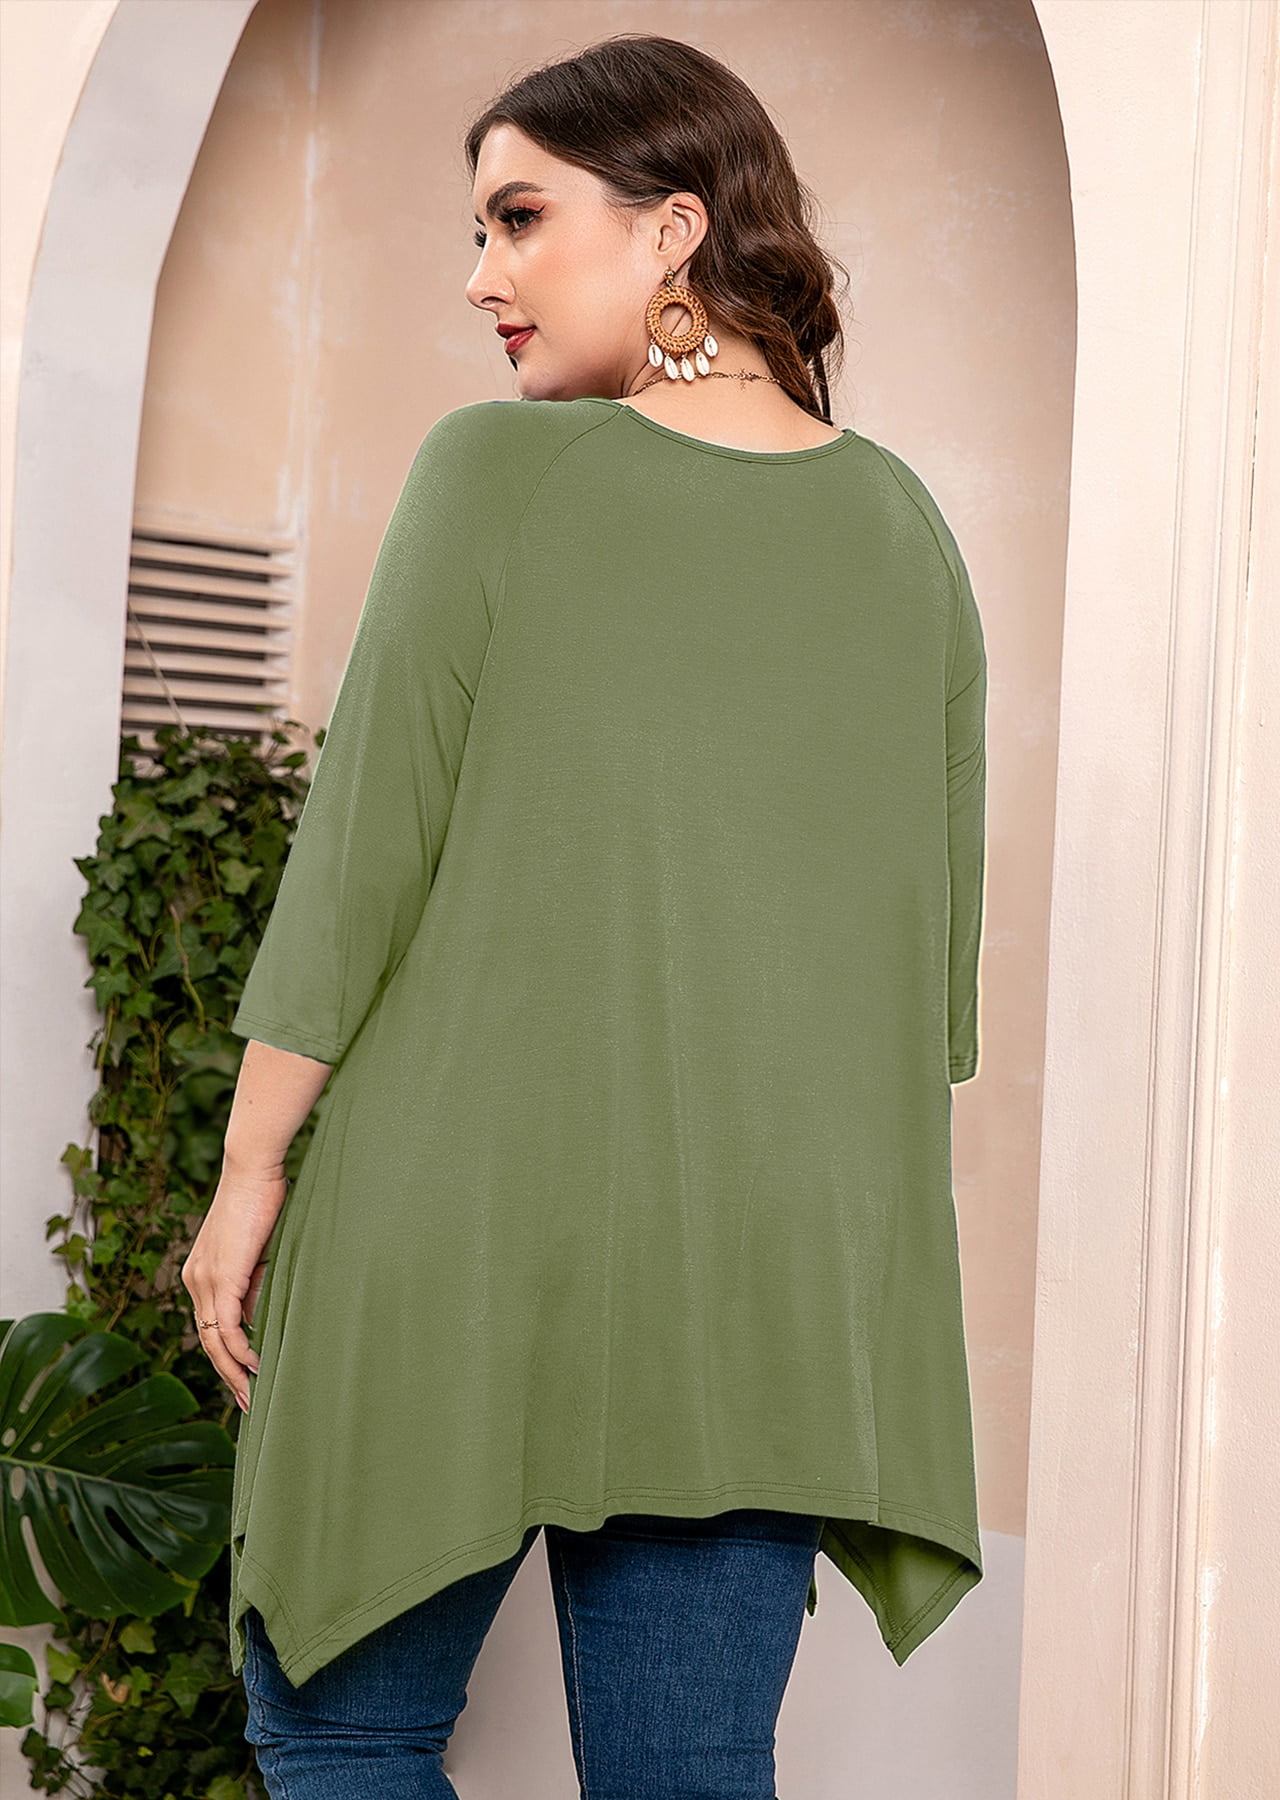 AusLook Plus Size Tunic Top for Women Clothes Short Sleeve Christmas Dark  Green 2X Summer Blouse Swing Tee Crewneck Clothing Flowy Shirts for  Leggings: Buy Online at Best Price in Egypt 